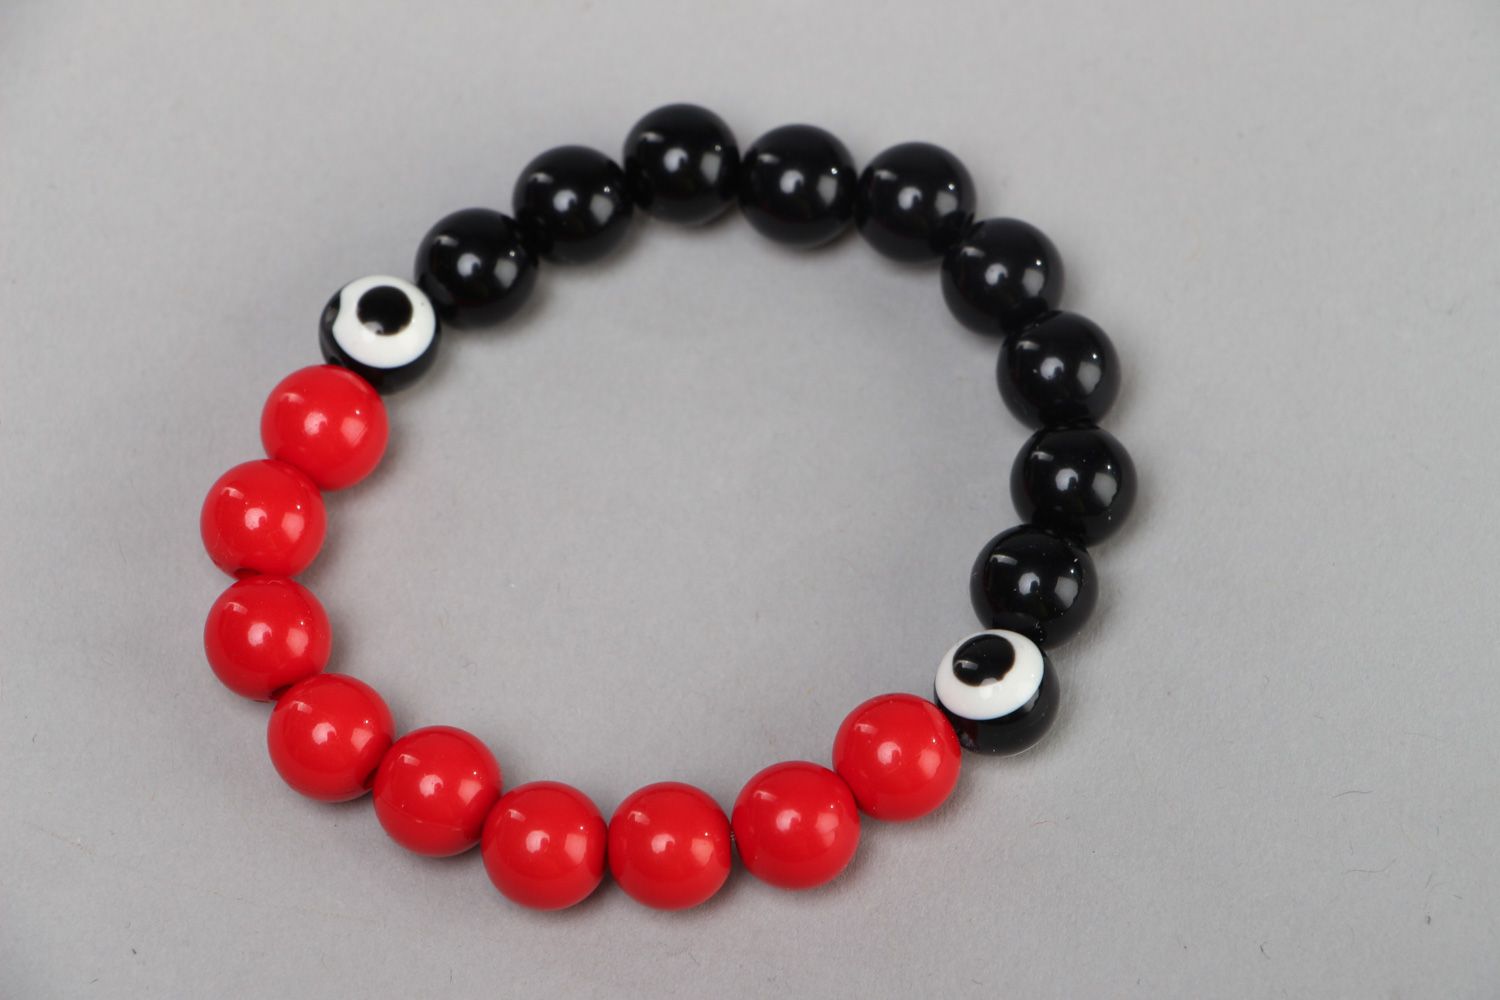 Handmade stretch wrist bracelet with red and black plastic beads for women photo 2